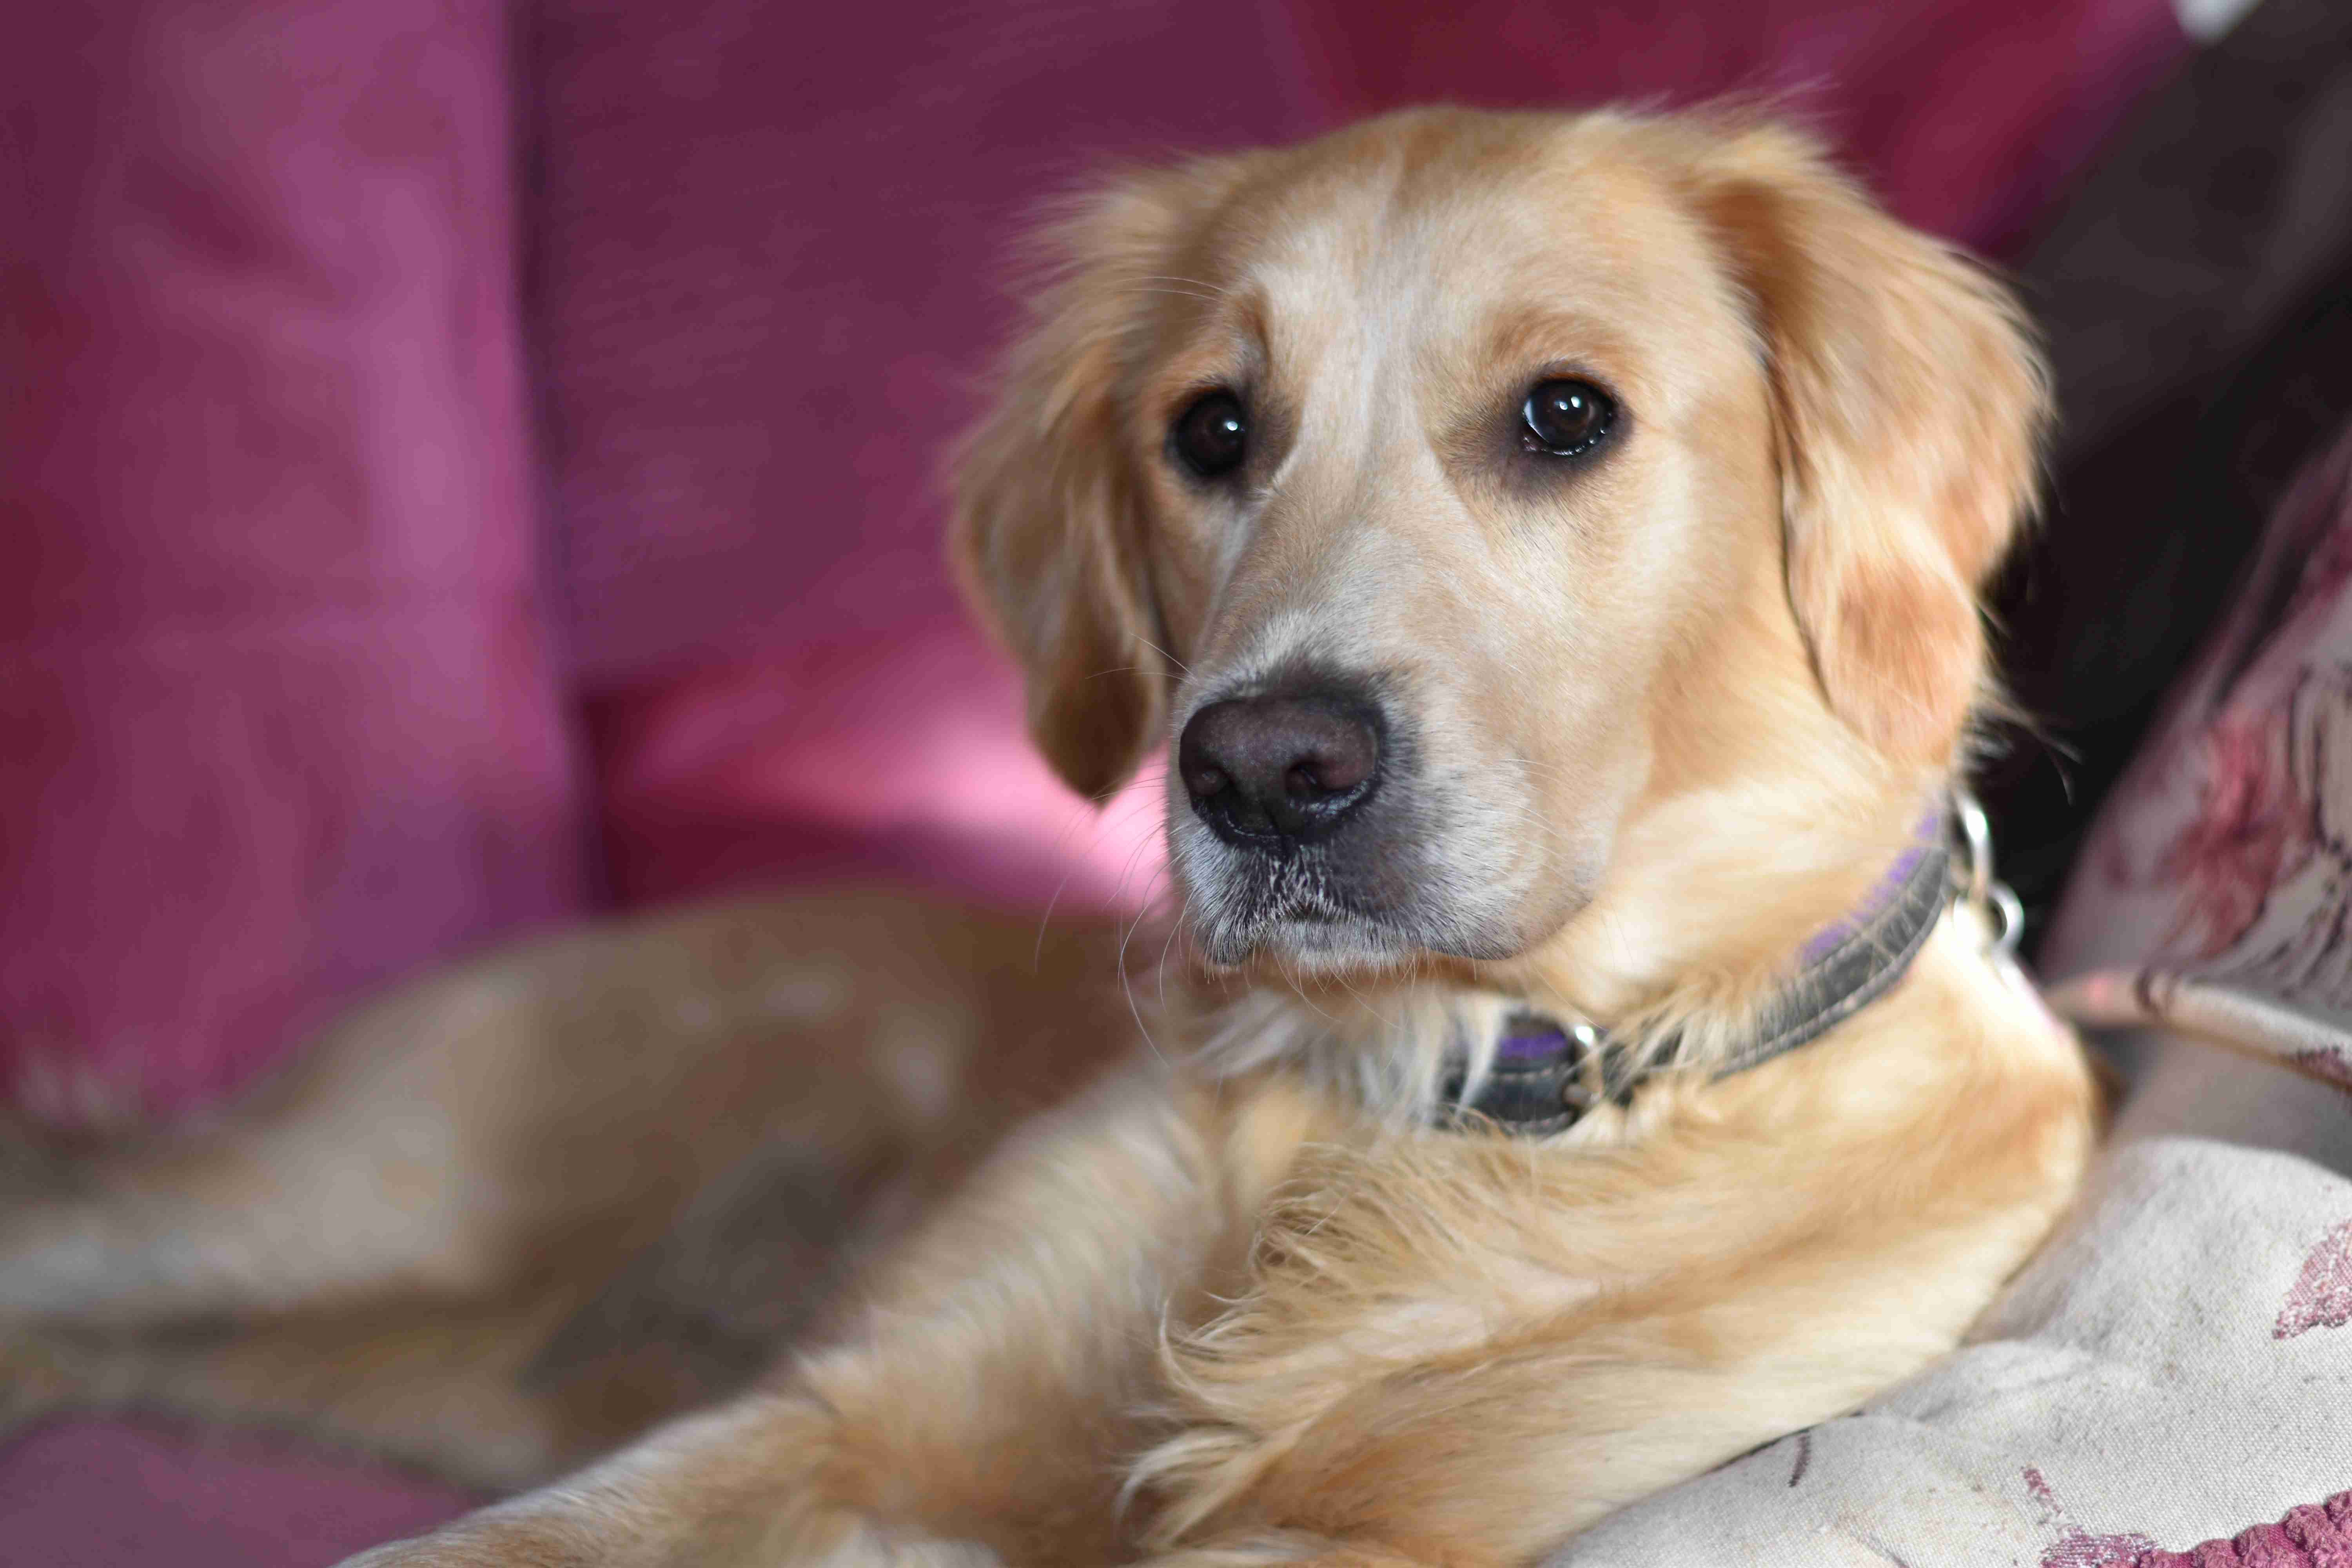 Can Golden Retrievers be trained to be therapy dogs?